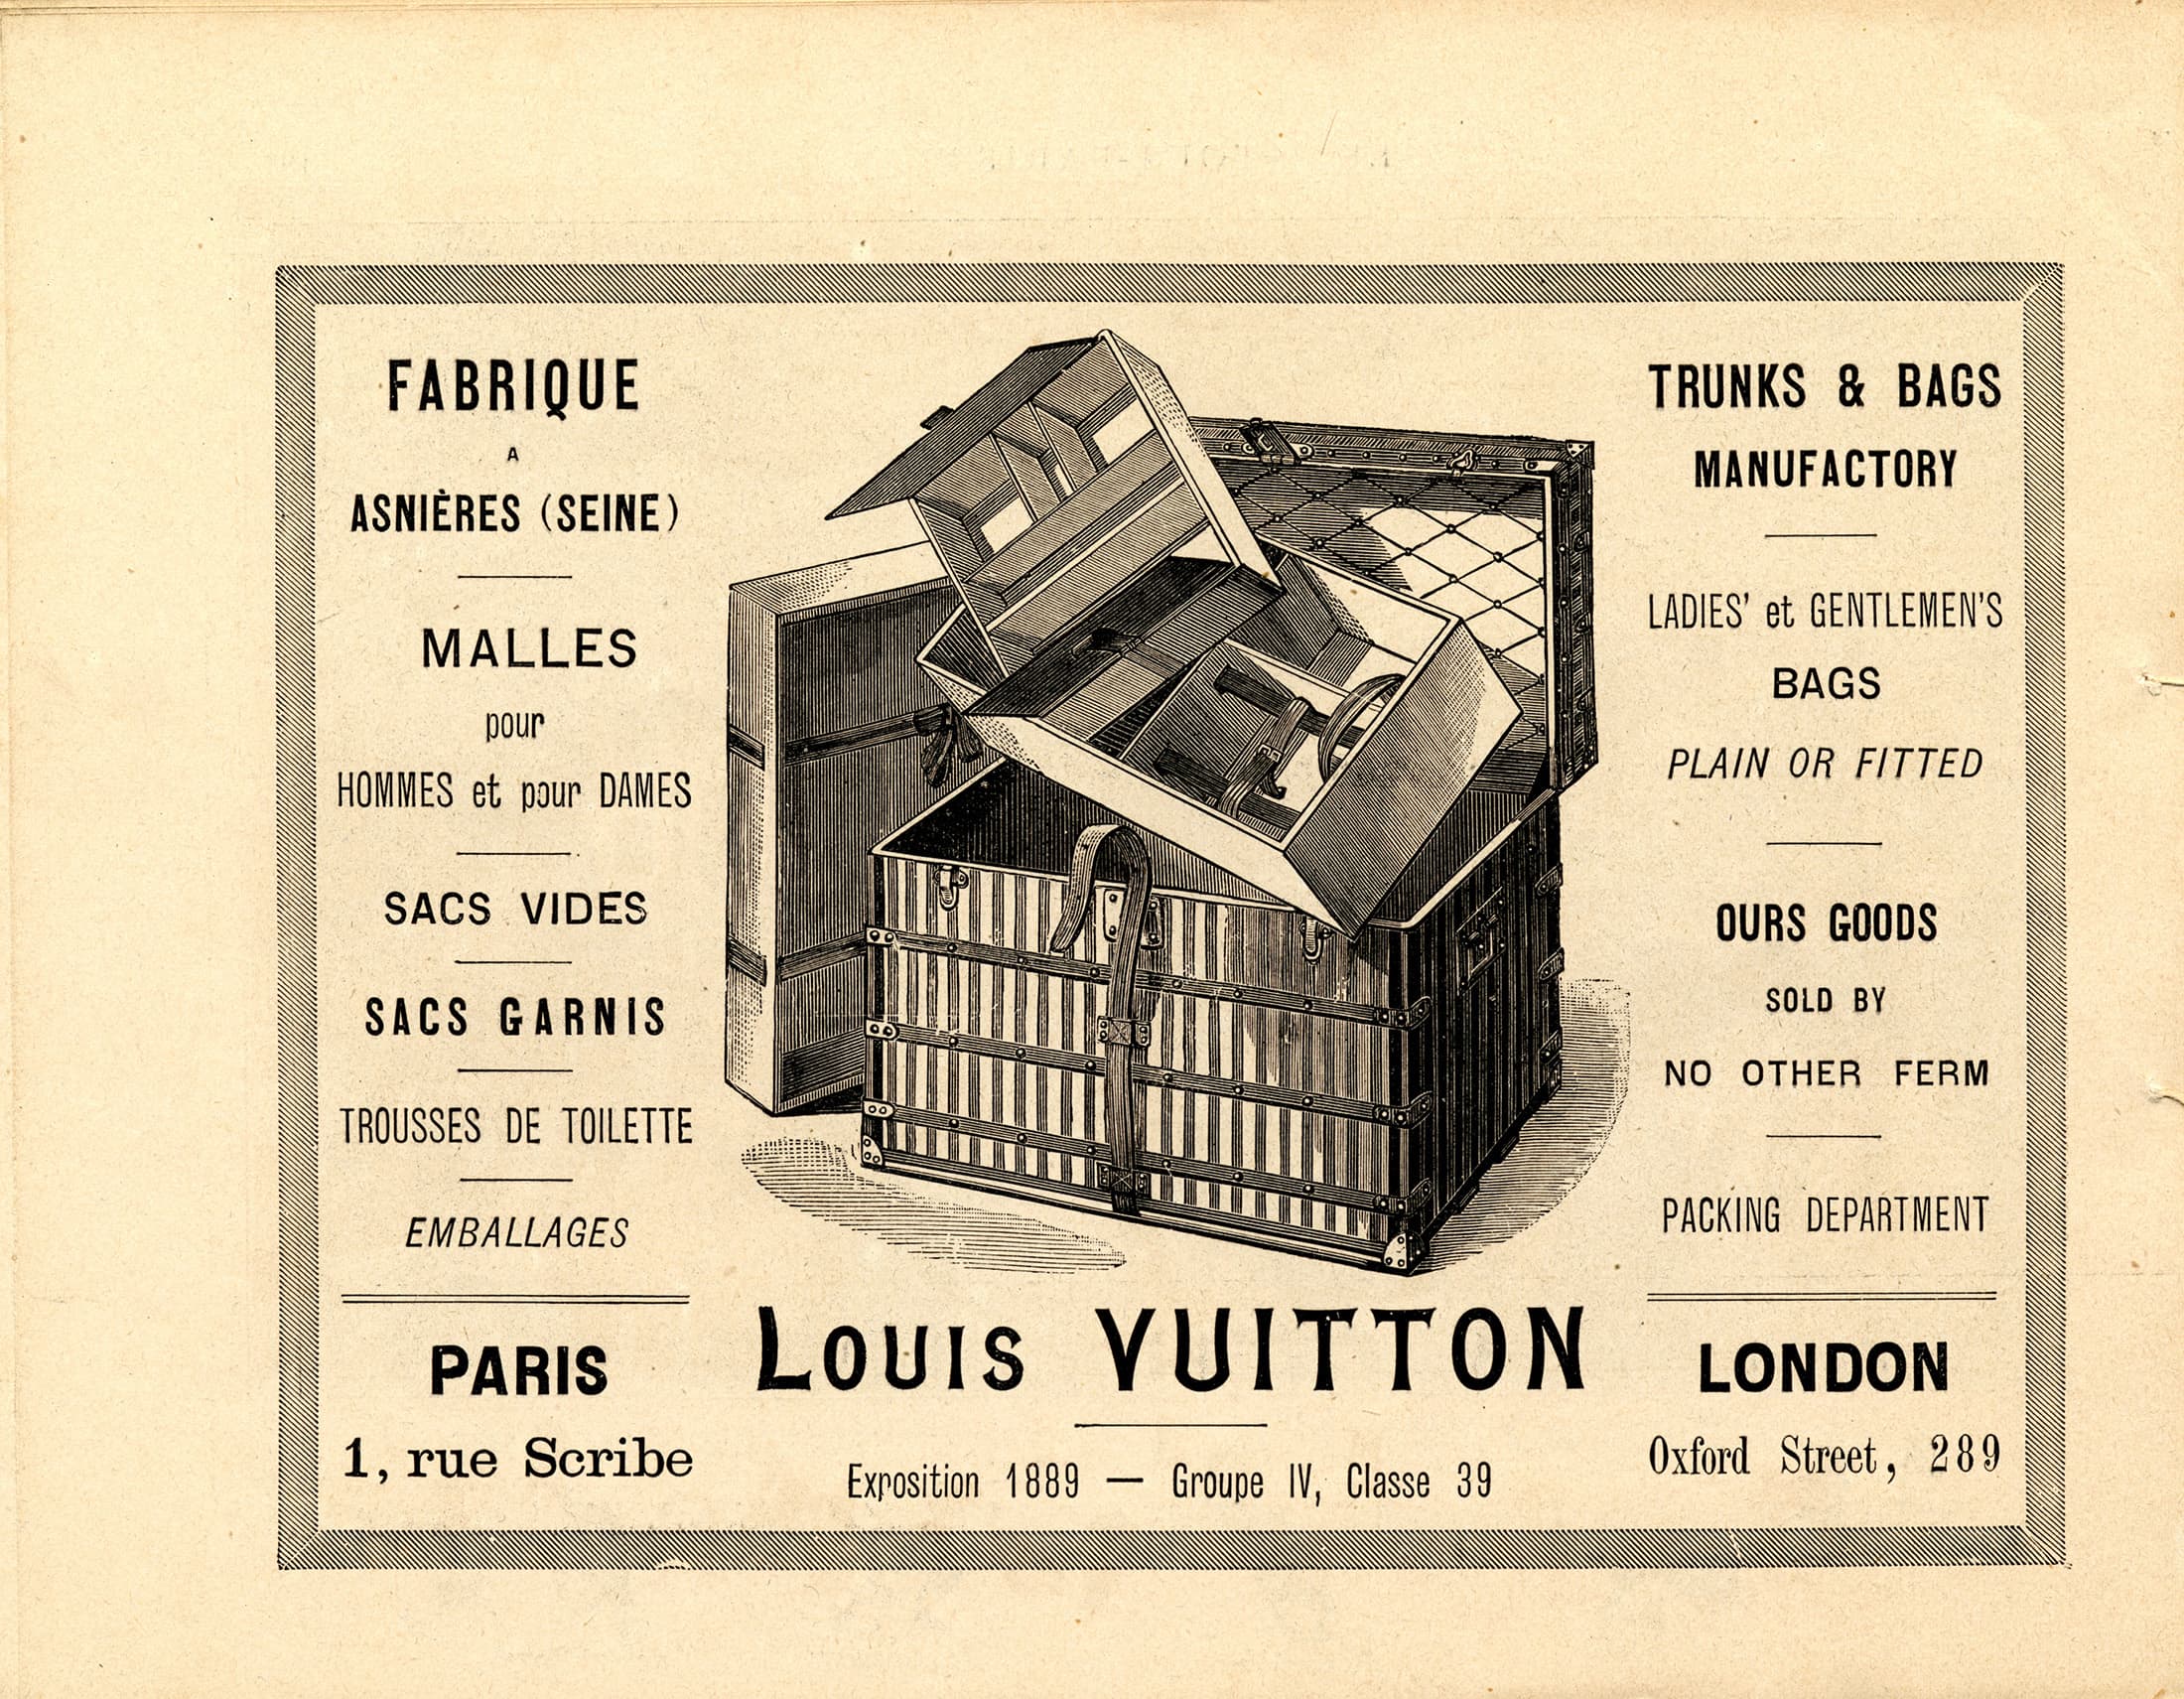 Louis Vuitton Celebrates Founder's 200th Birthday With 200 Trunk